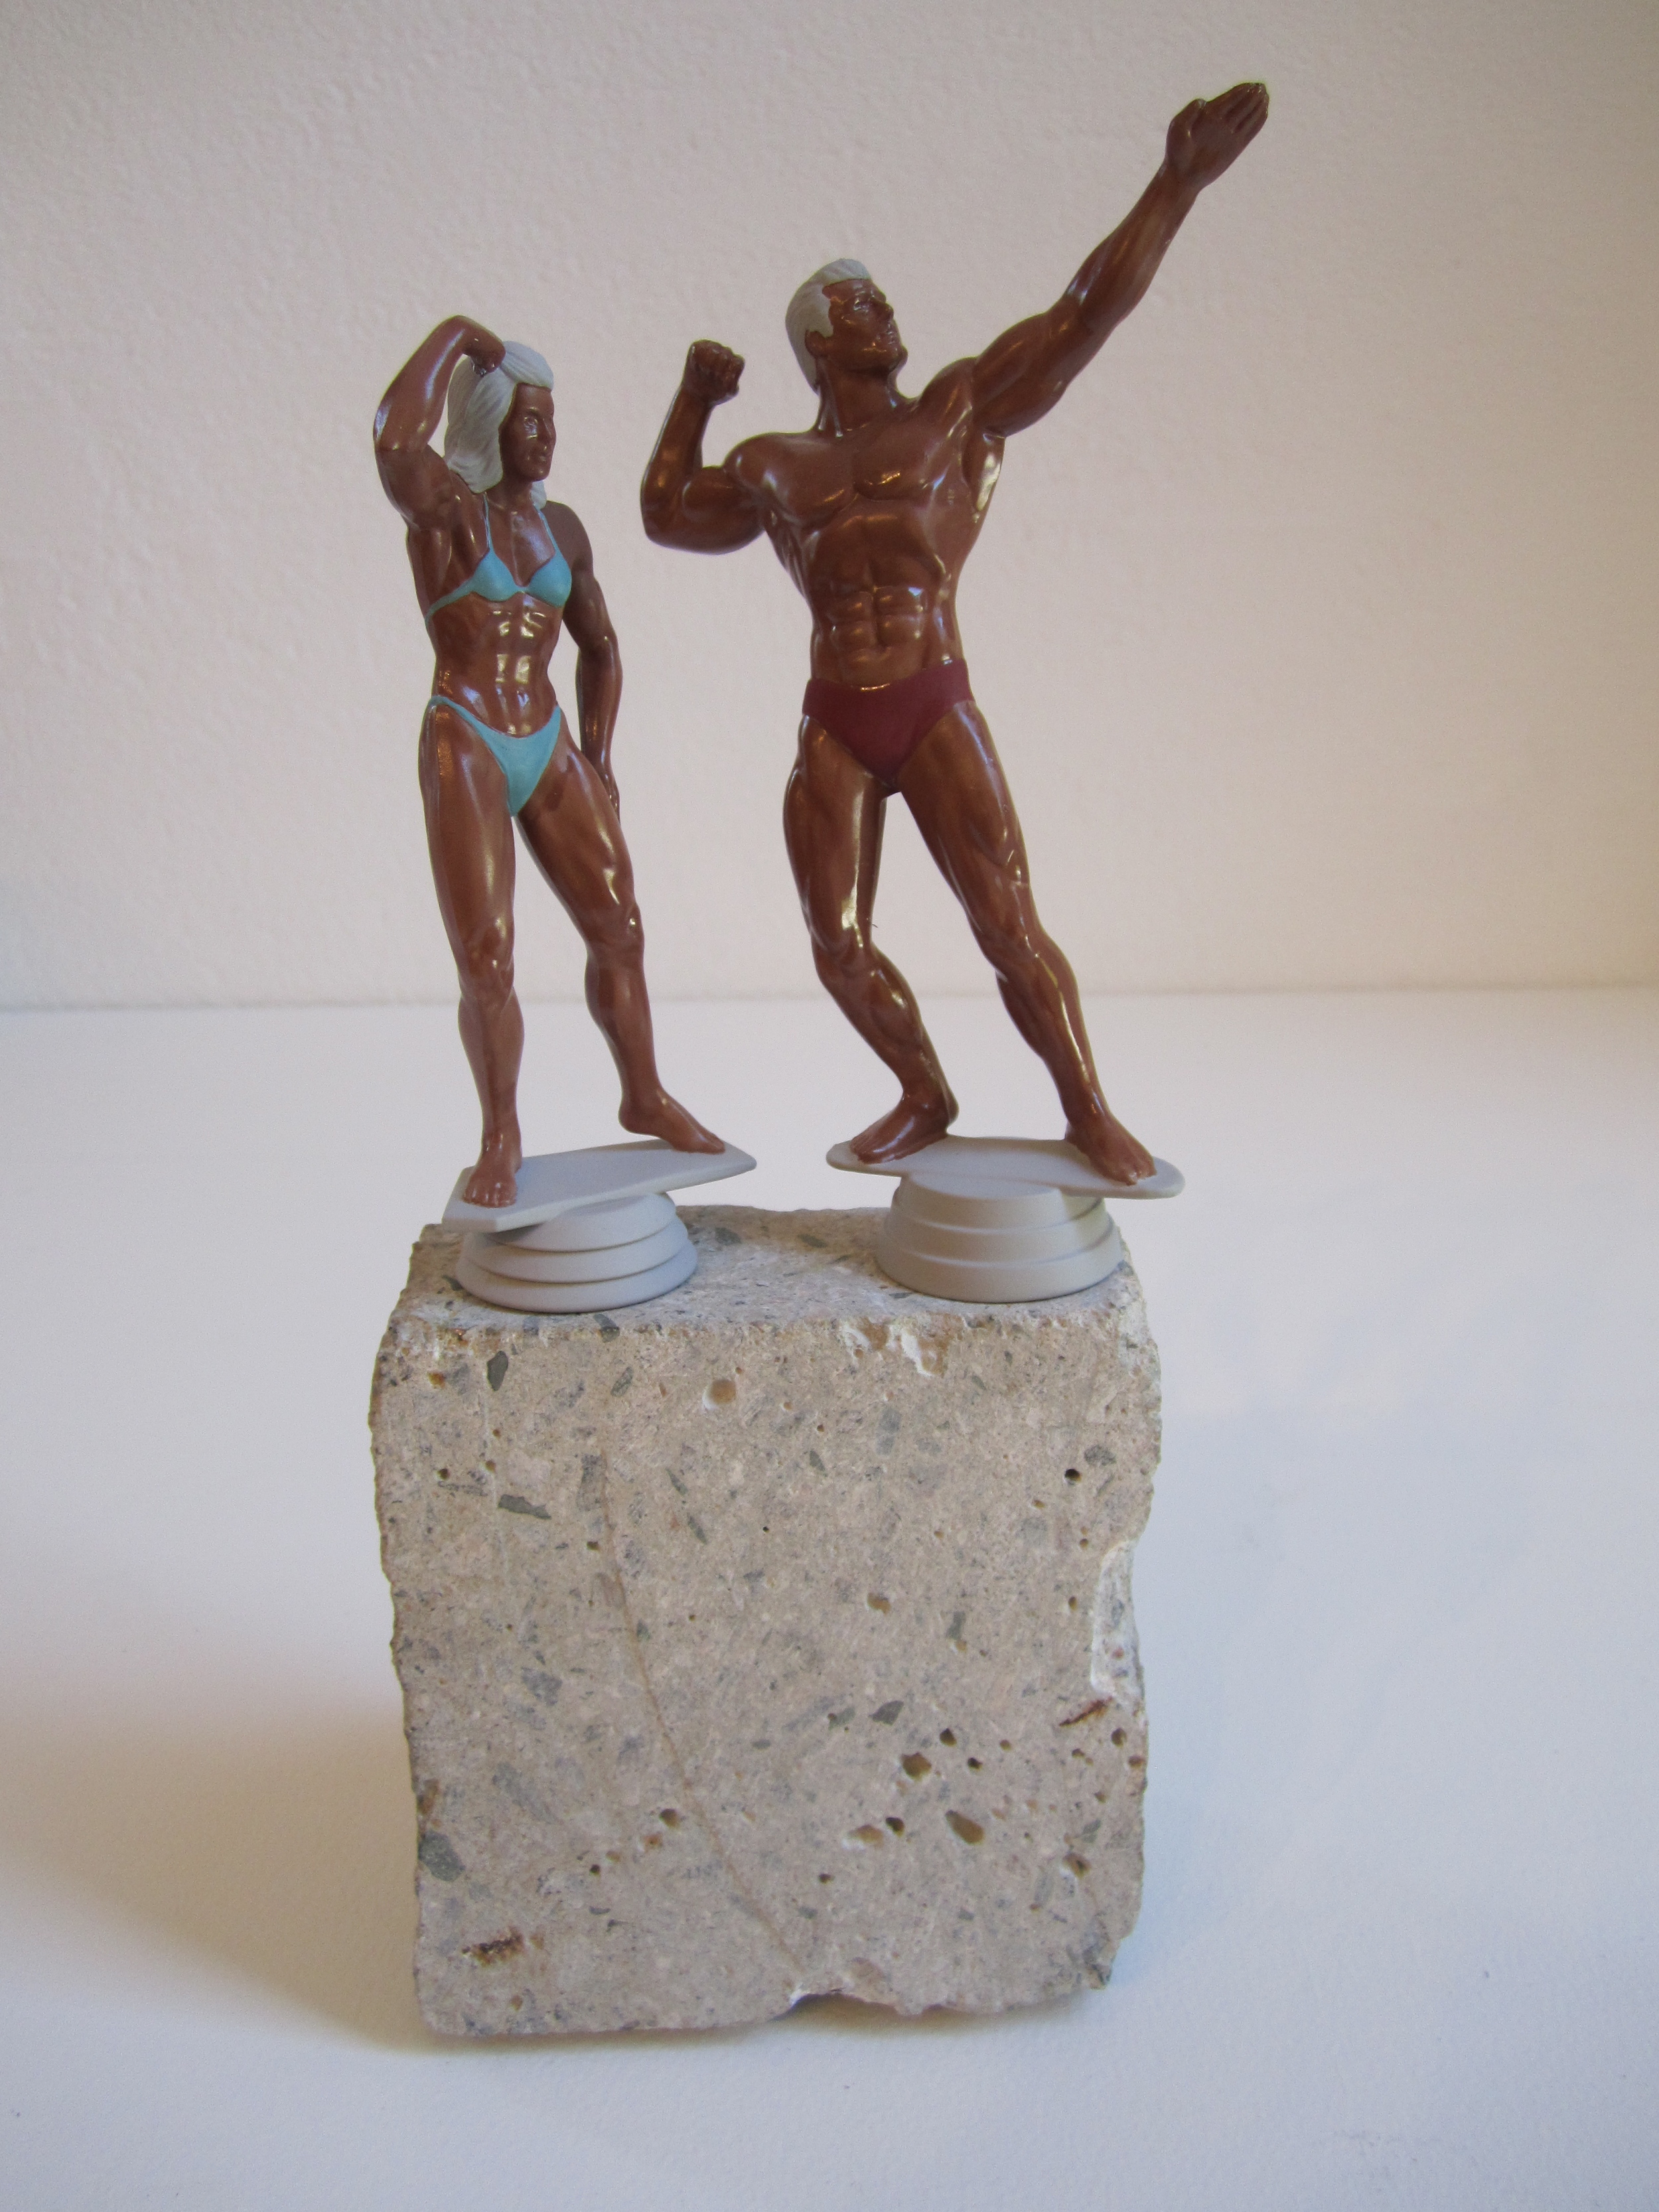   Mr. and Mrs. Brown, 2011    Enamel on acrylic, concrete 30 x 12 x 10  